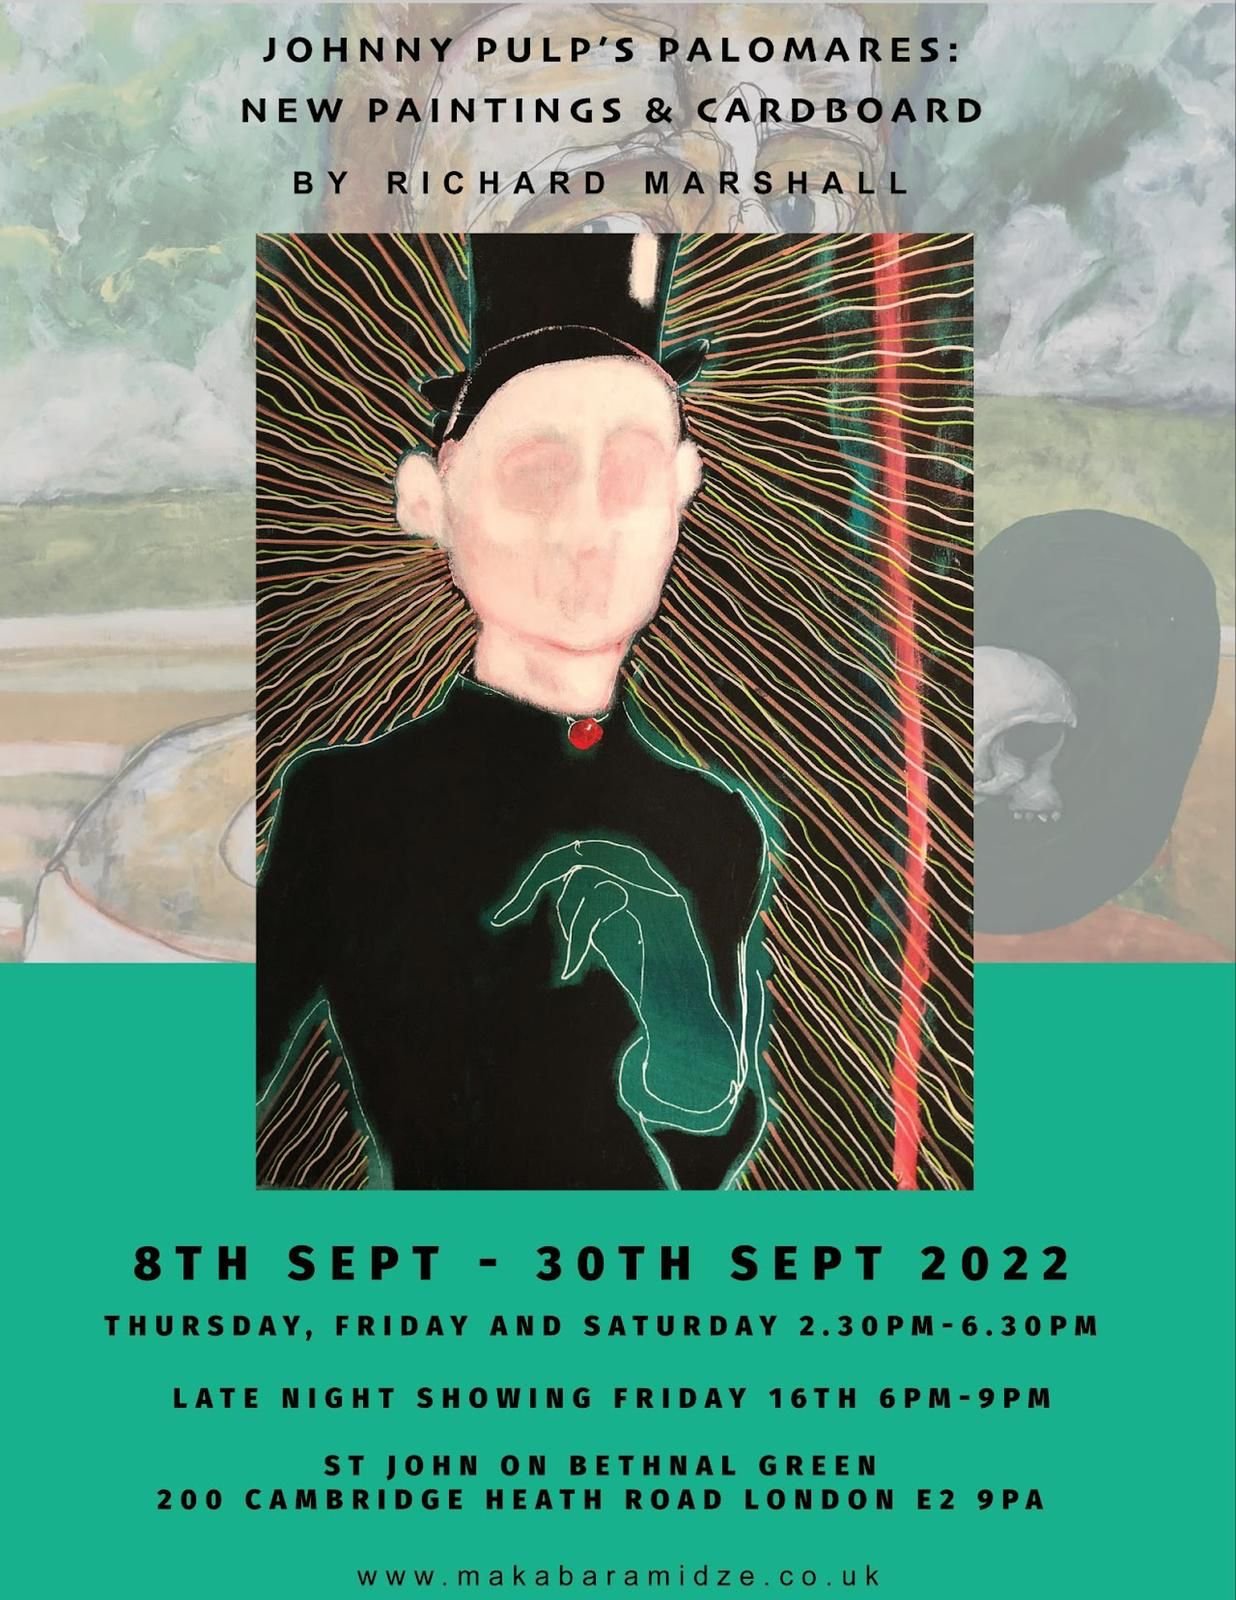 Exhibition at St John's Church Bethnal Green 8th Sept-30th Sept